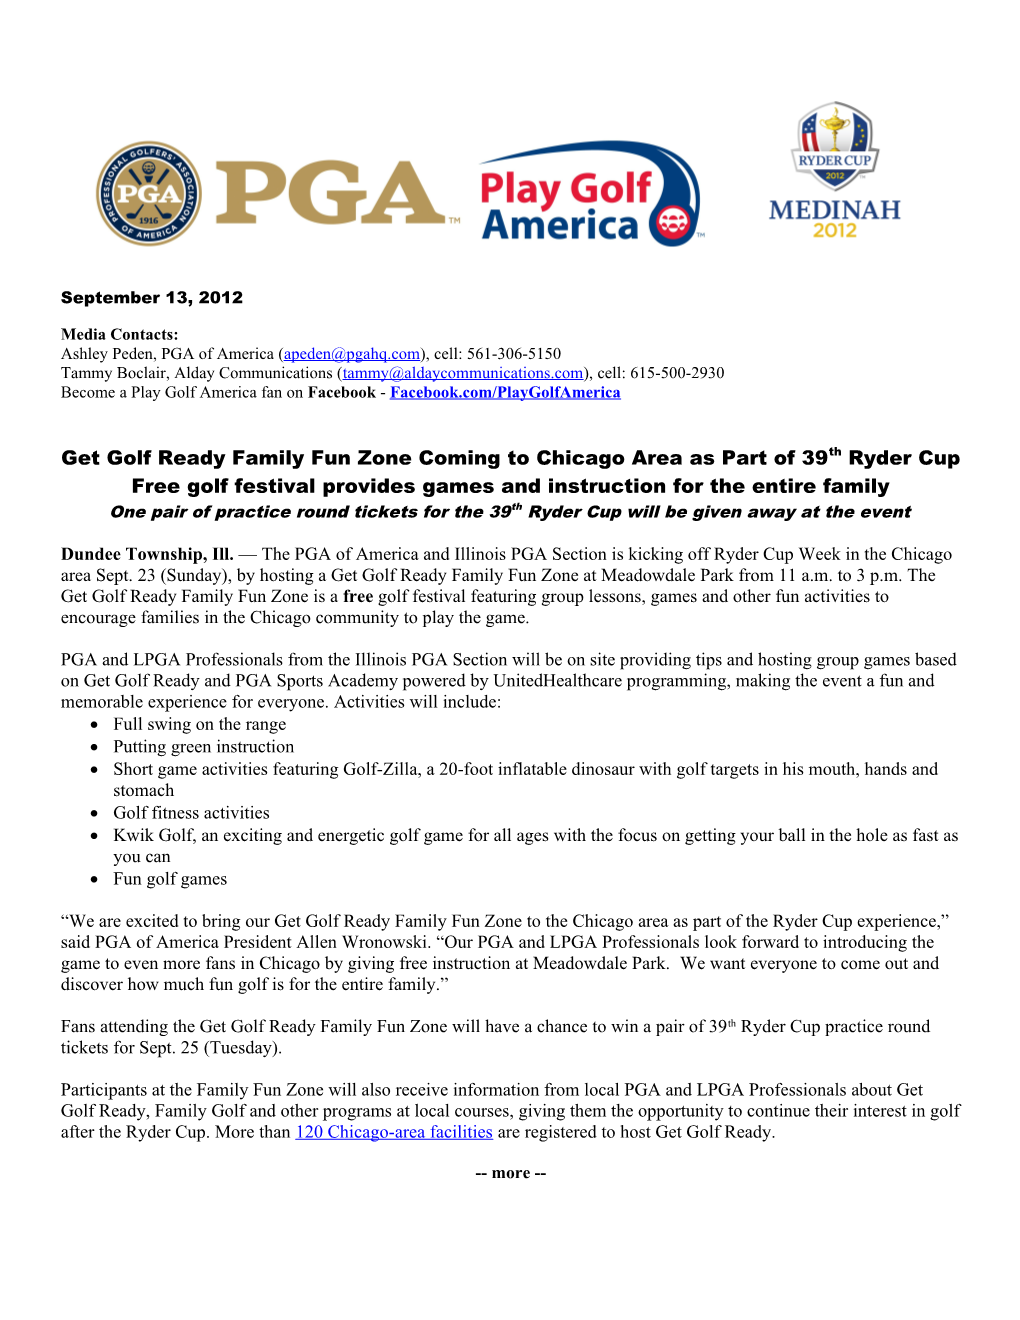 Get Golf Ready Family Fun Zone Coming to Chicago, 1 of 1